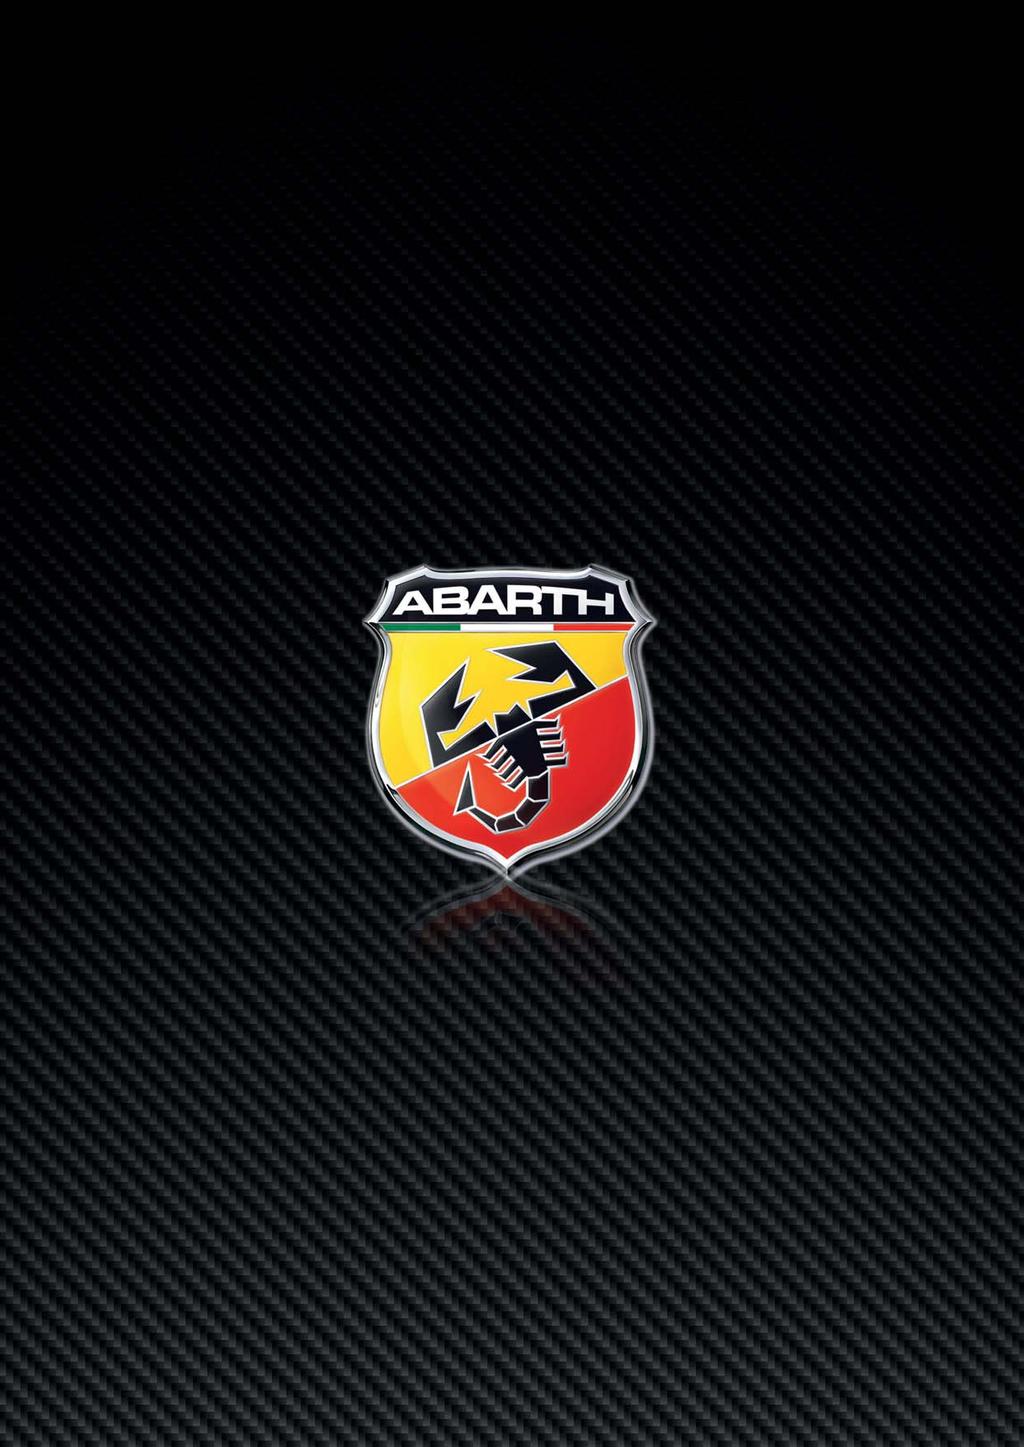 Abarth products are distributed by Fiat Group Automobiles South Africa (Pty) Ltd.